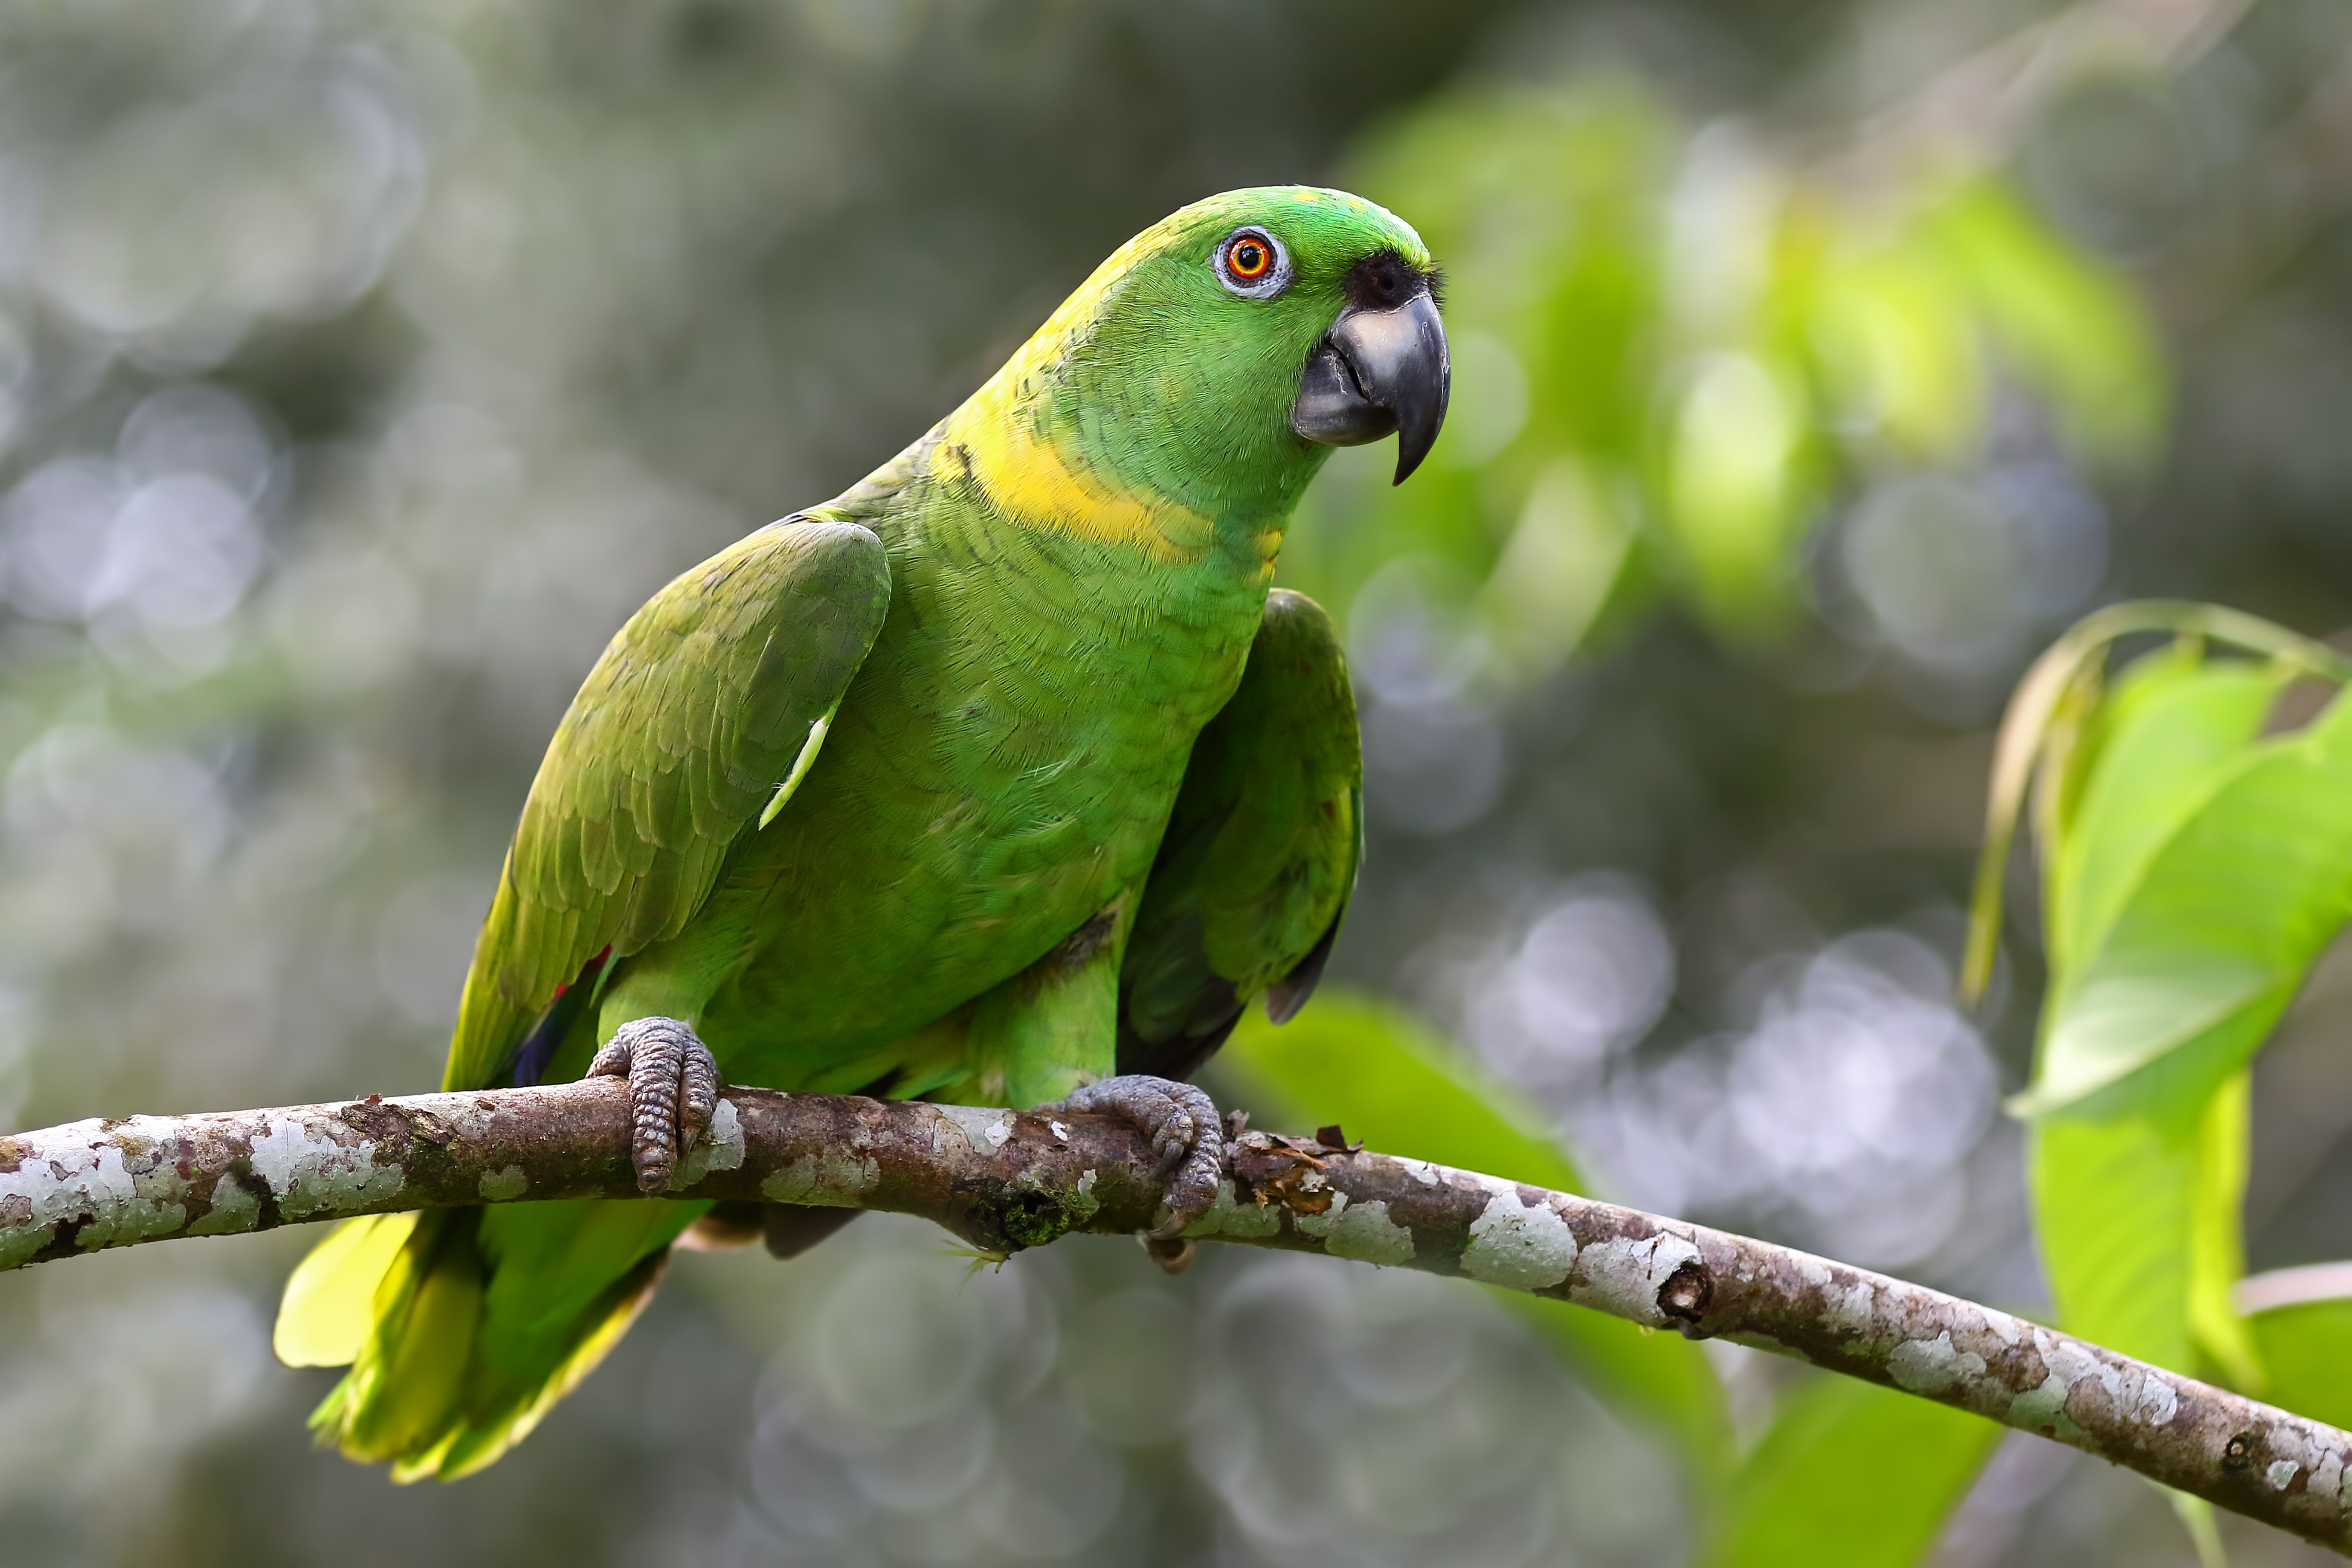 Yellow-naped Amazon parrot on a branch